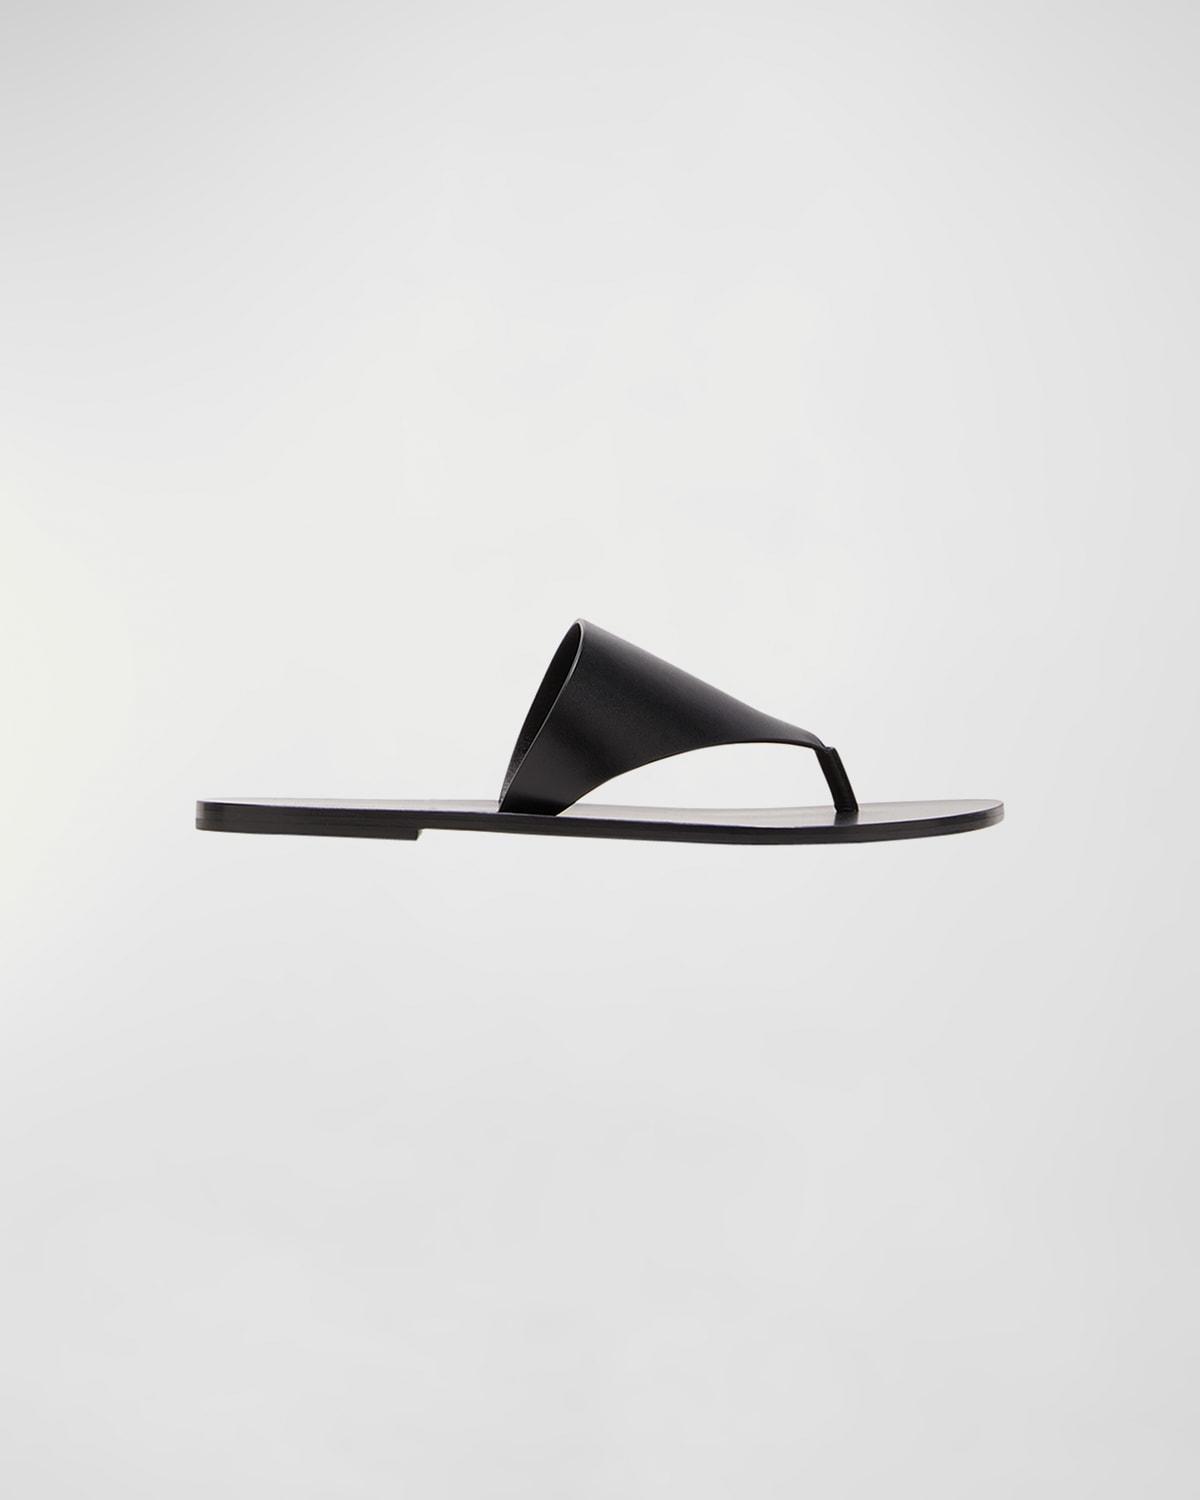 The Row Avery Thong Sandal Product Image